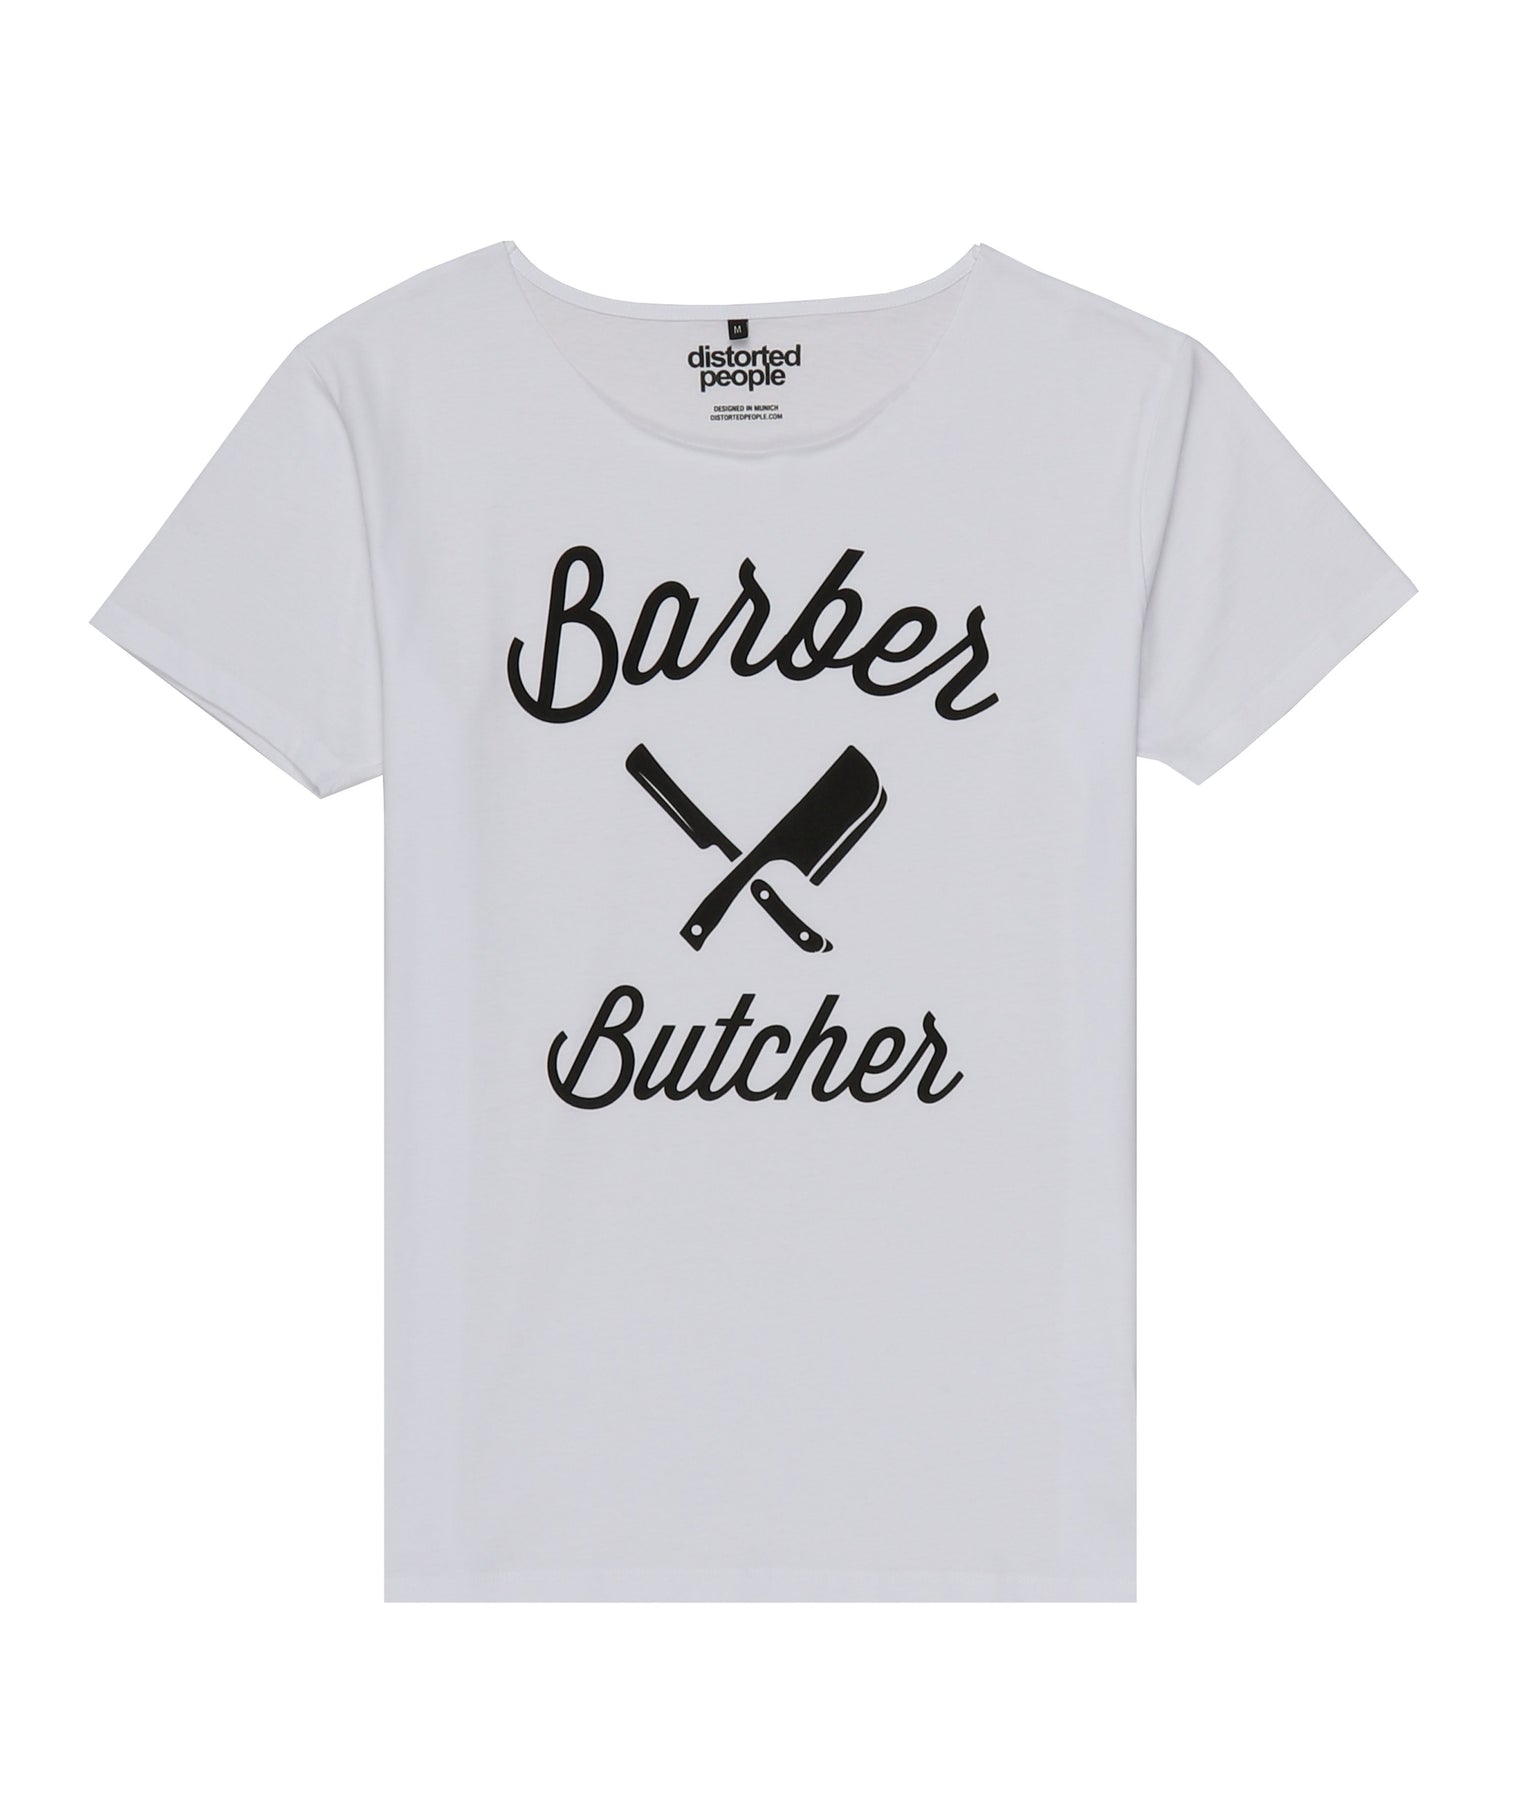 People Distorted Cut Distorted Neck People T-Shirt USA Black Barber Blades & | Butcher –